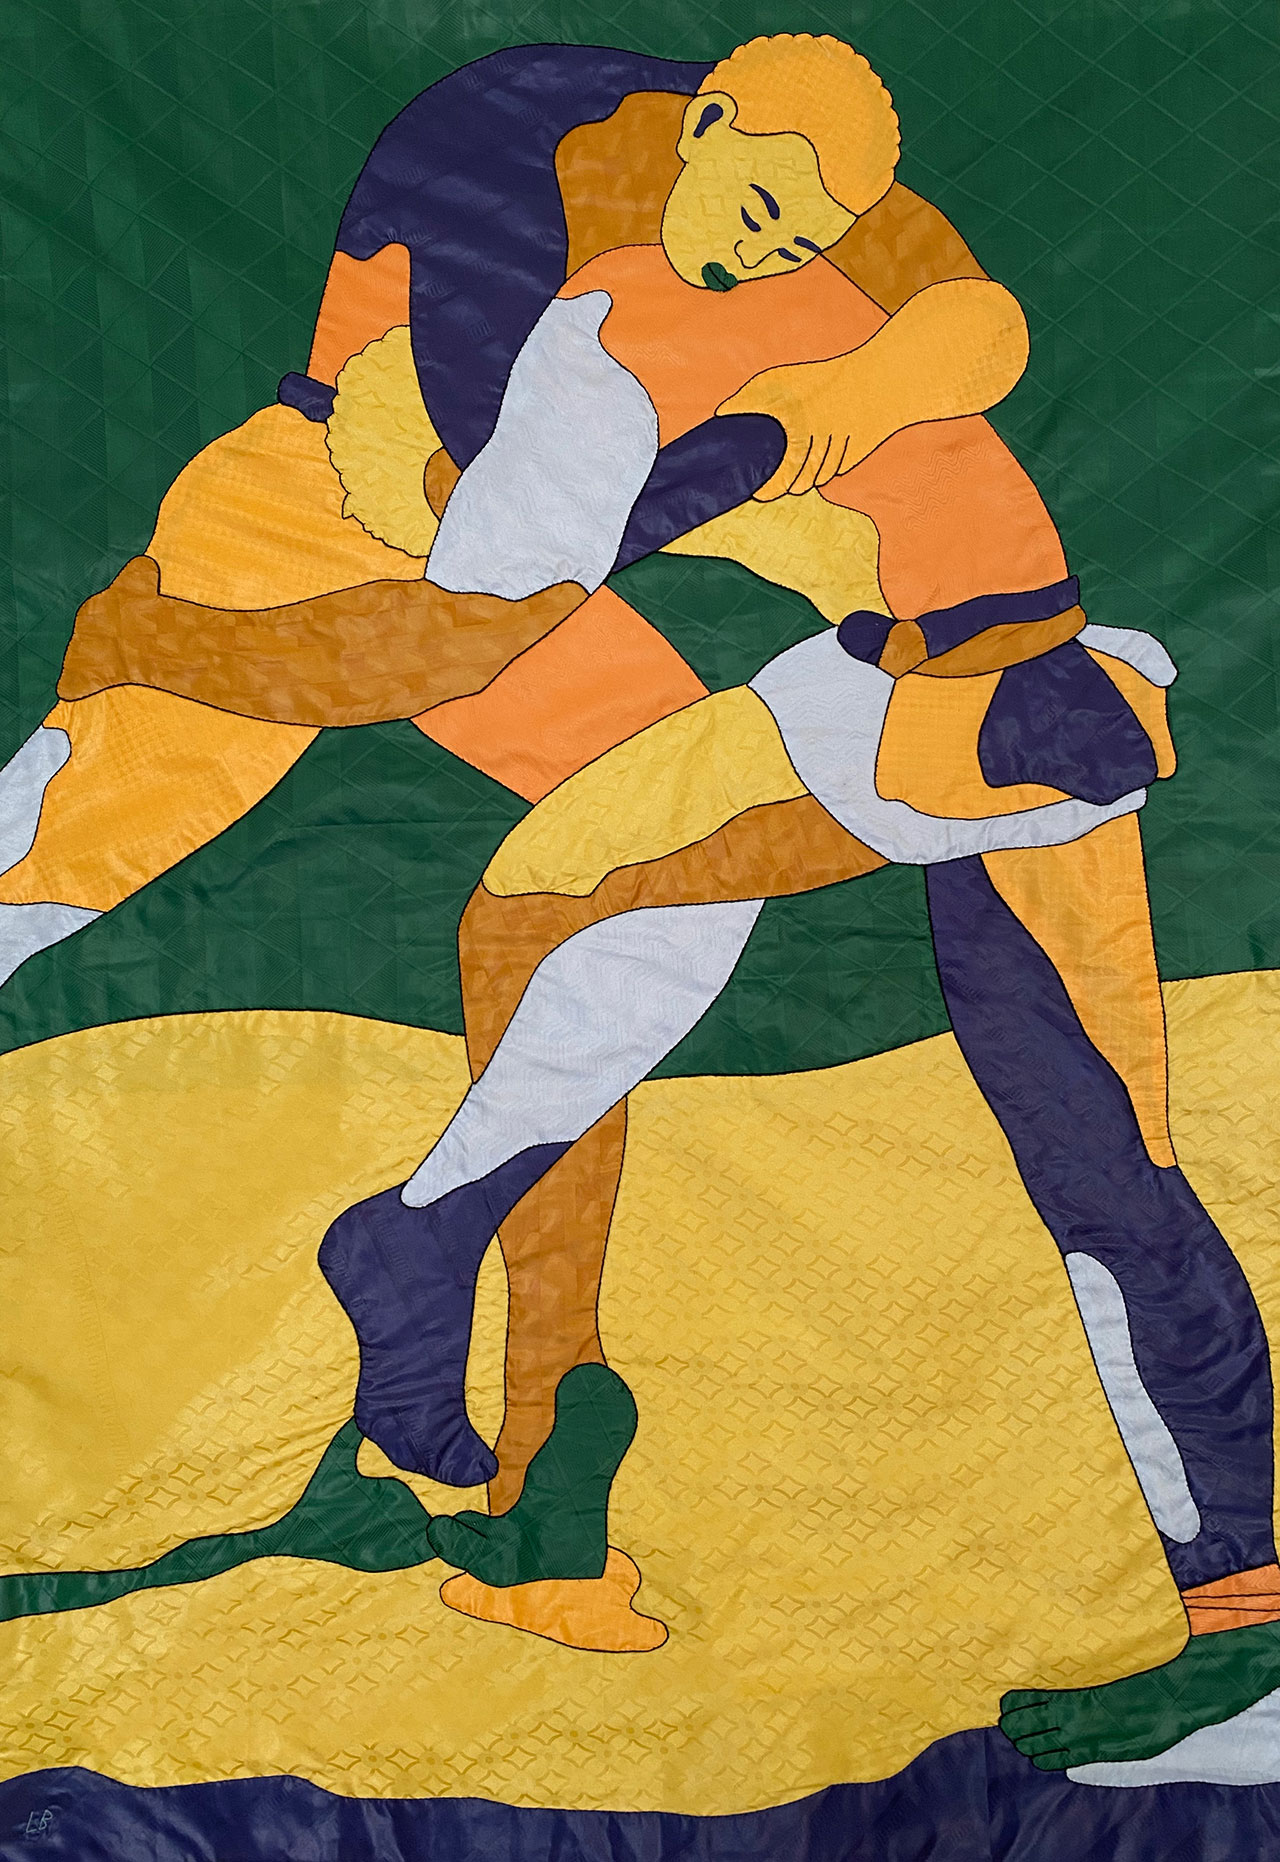 Louis Barthélemy, KHAYAMIYA 21 - INTERTWINED from the Lutteurs/Wrestlers series, 2021. Appliquéd and hand embroidered «bazins» on cotton canvas. Unique edition.